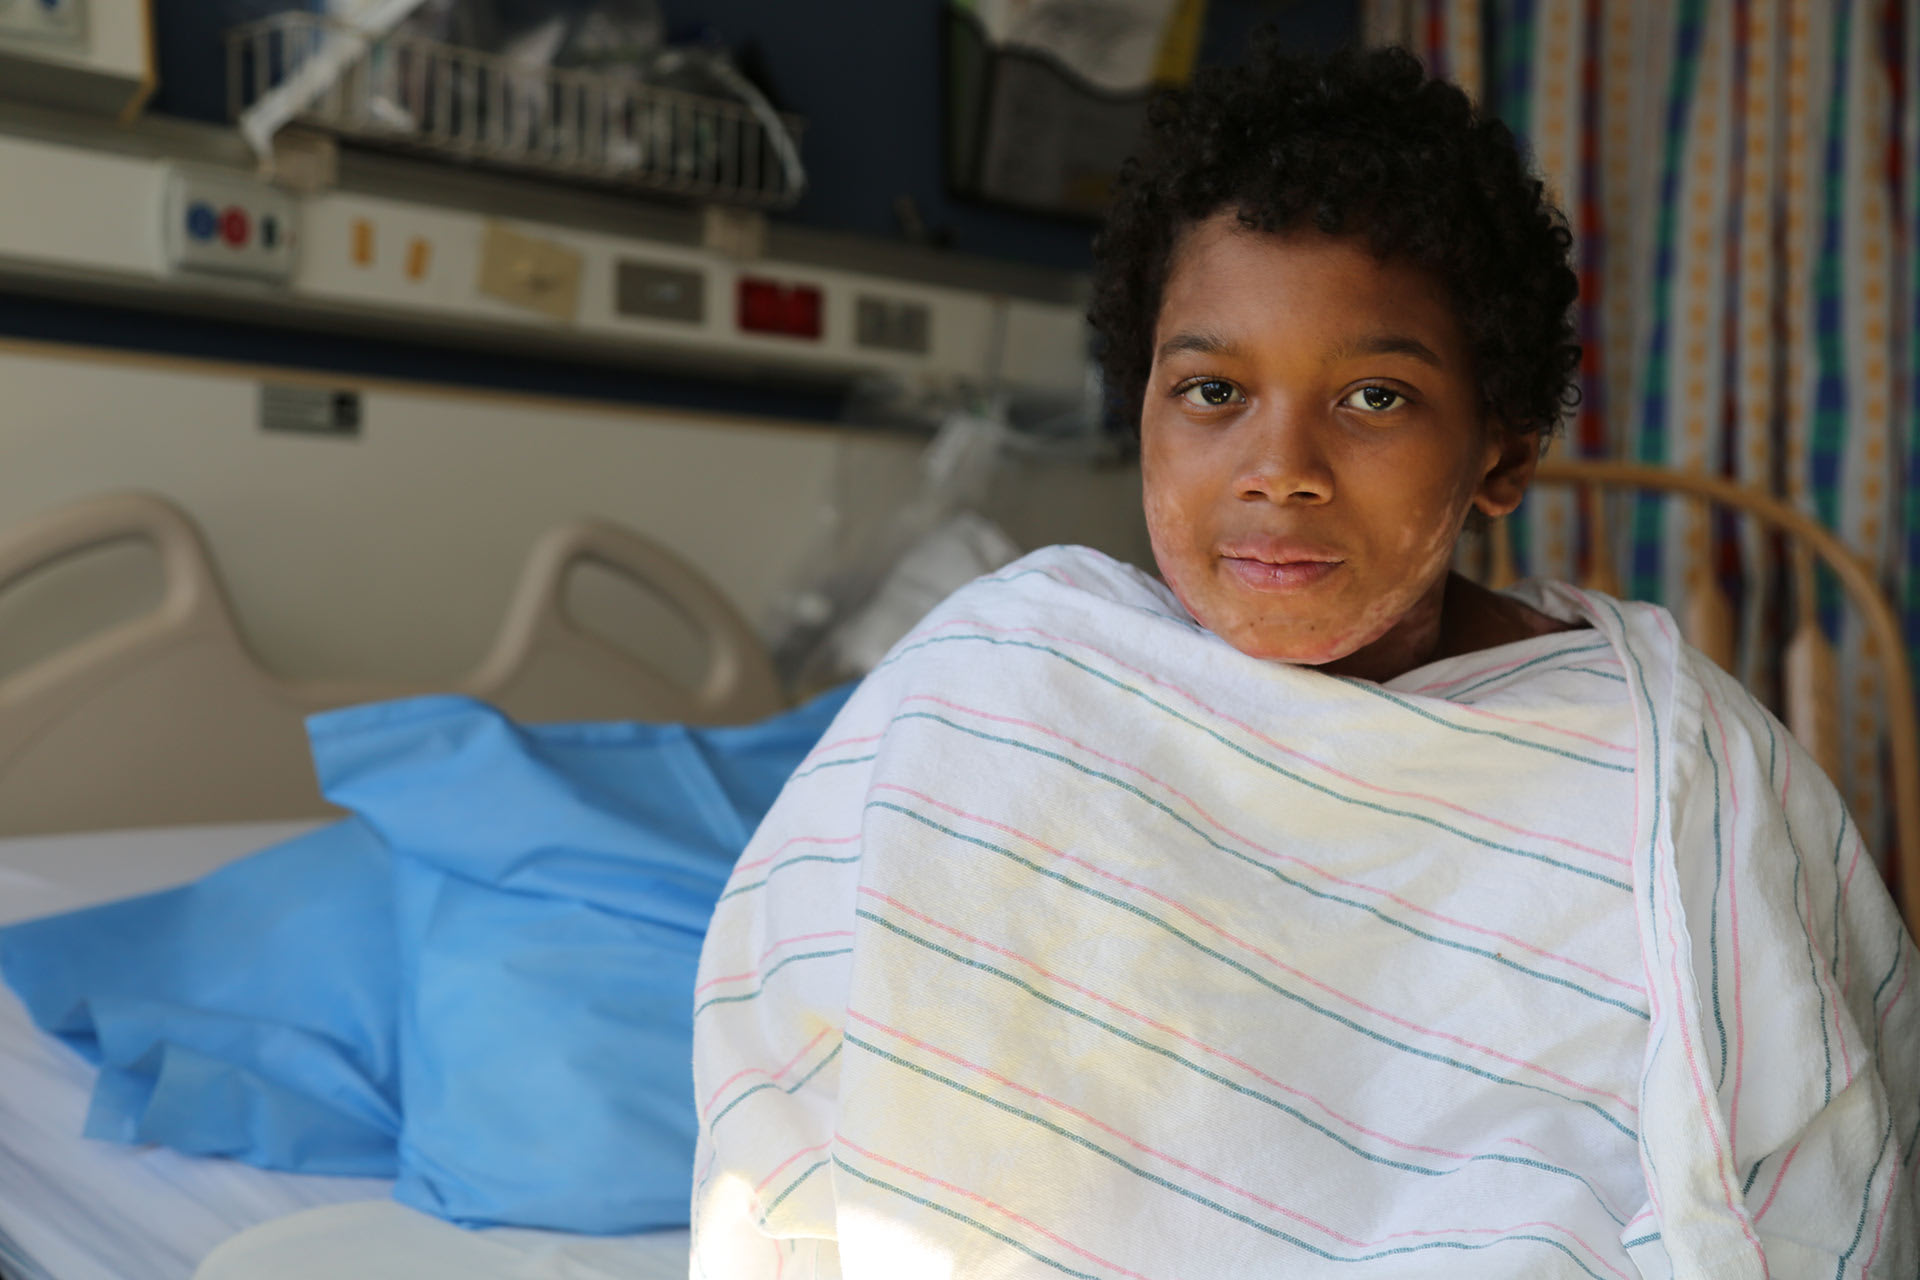 A boy sits in a hospital bed wrapped in a blanket